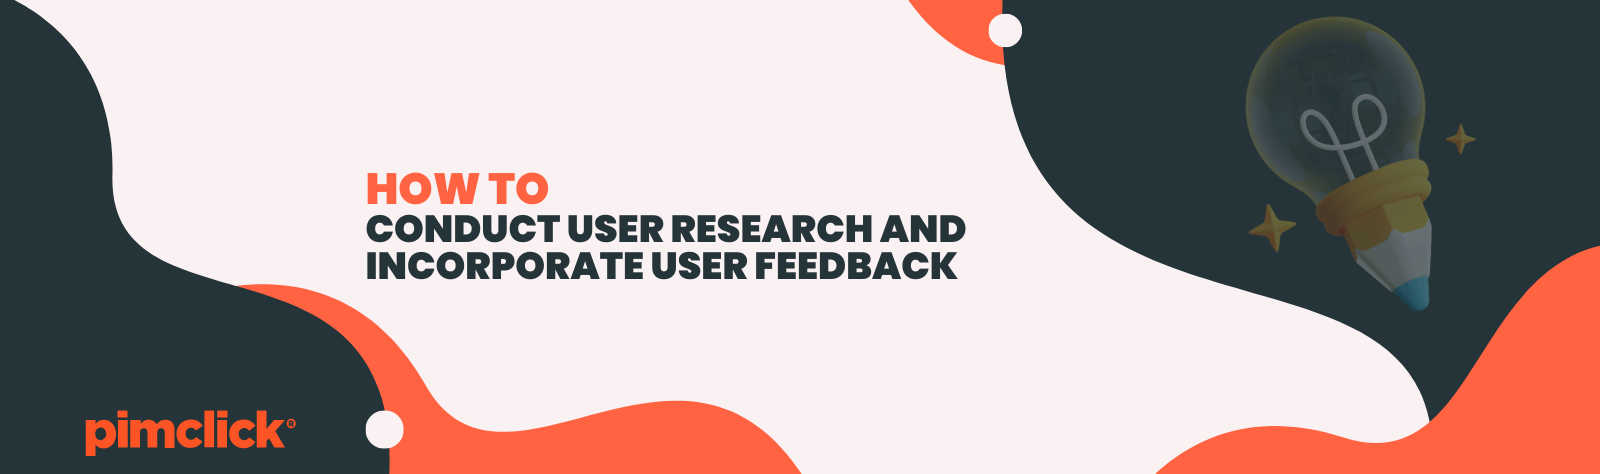 How to conduct user research and incorporate user feedback into the design process